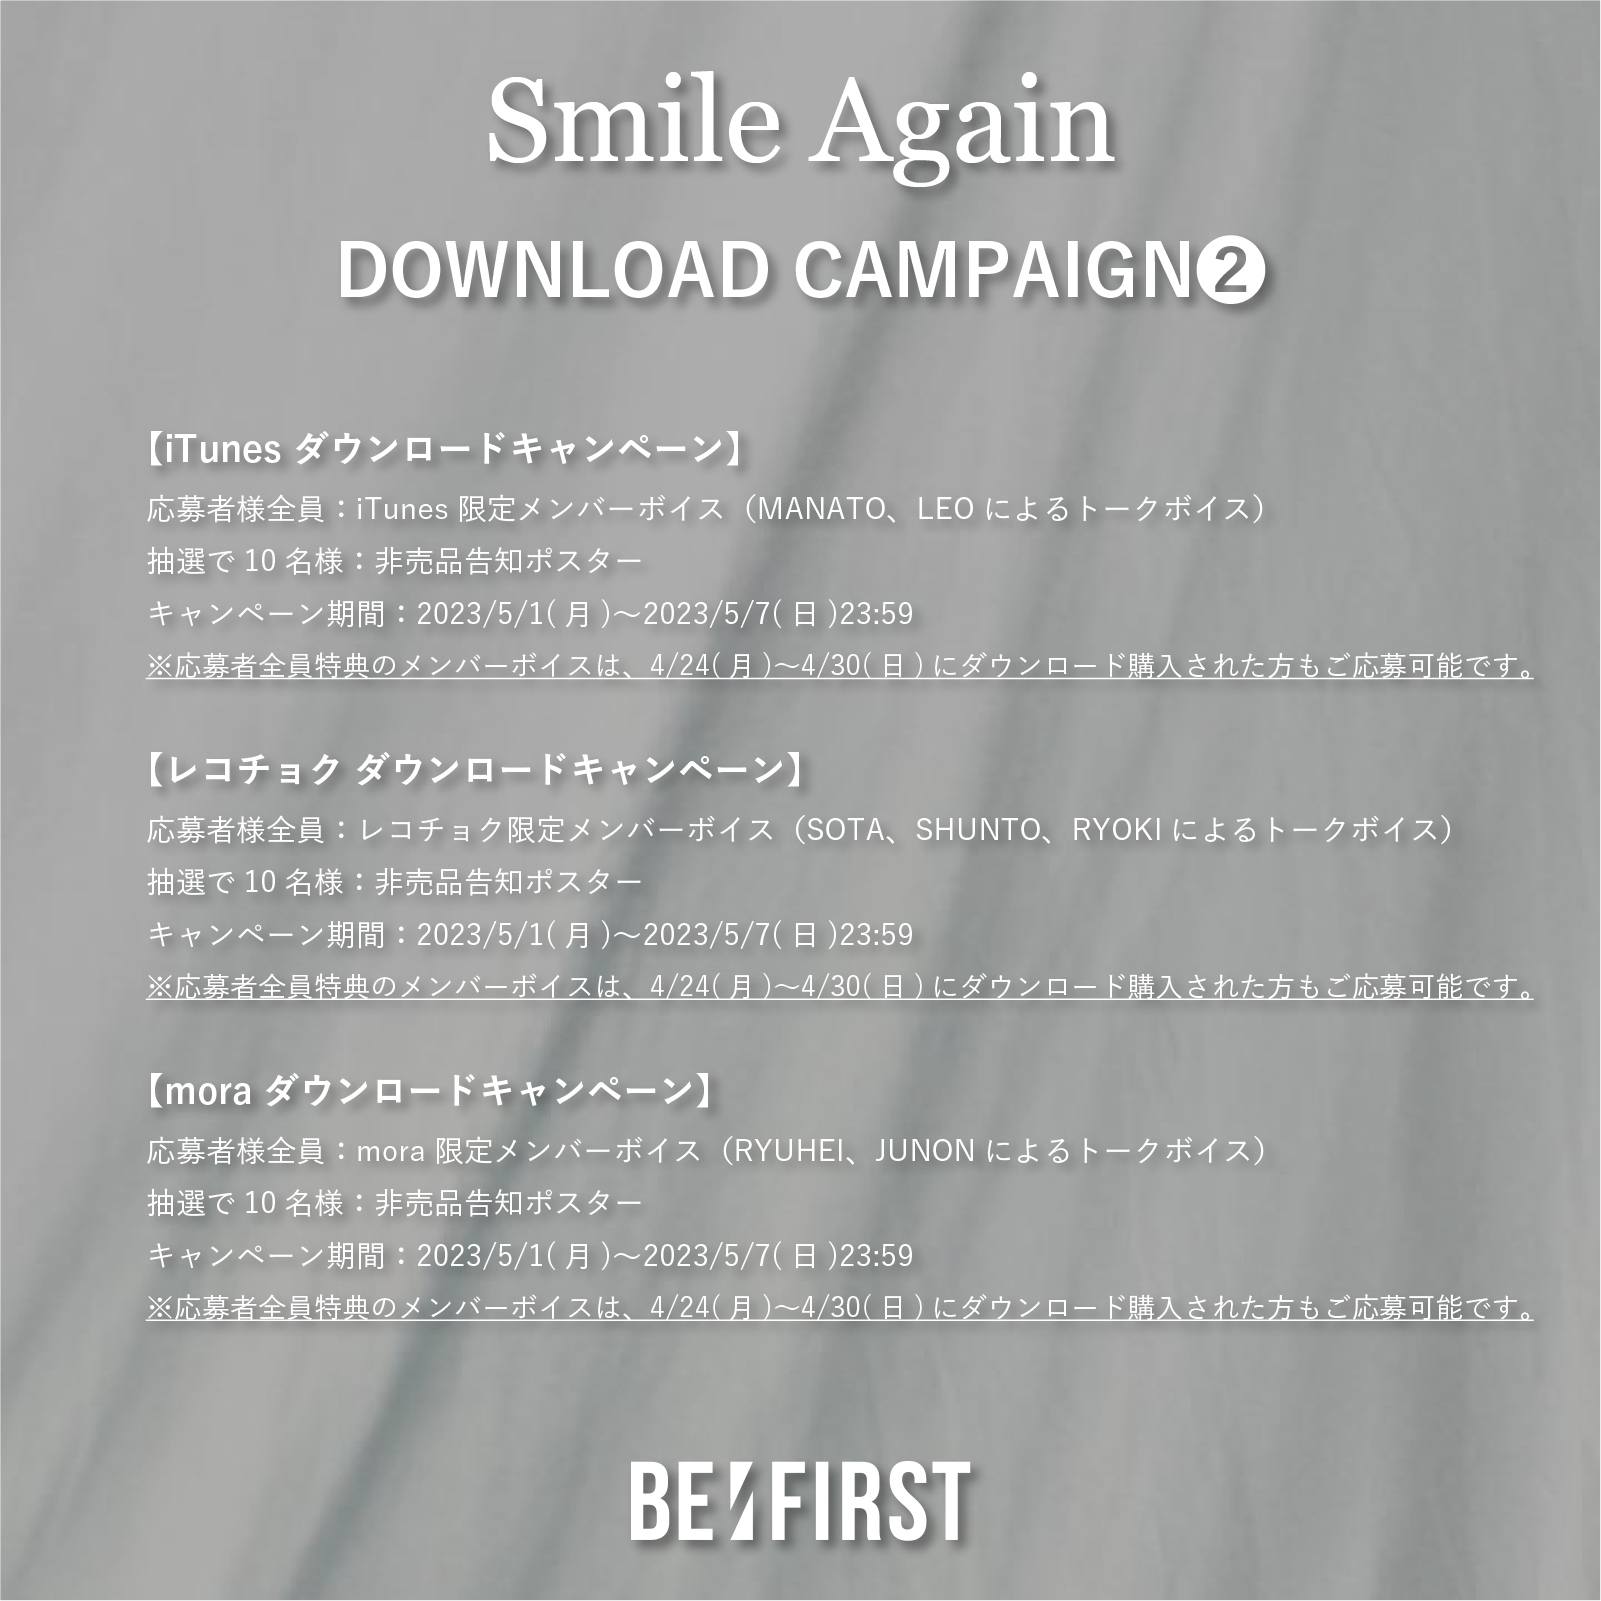 Smile Again｣ ダウンロードキャンペーン第2弾が決定 | BE:FIRST